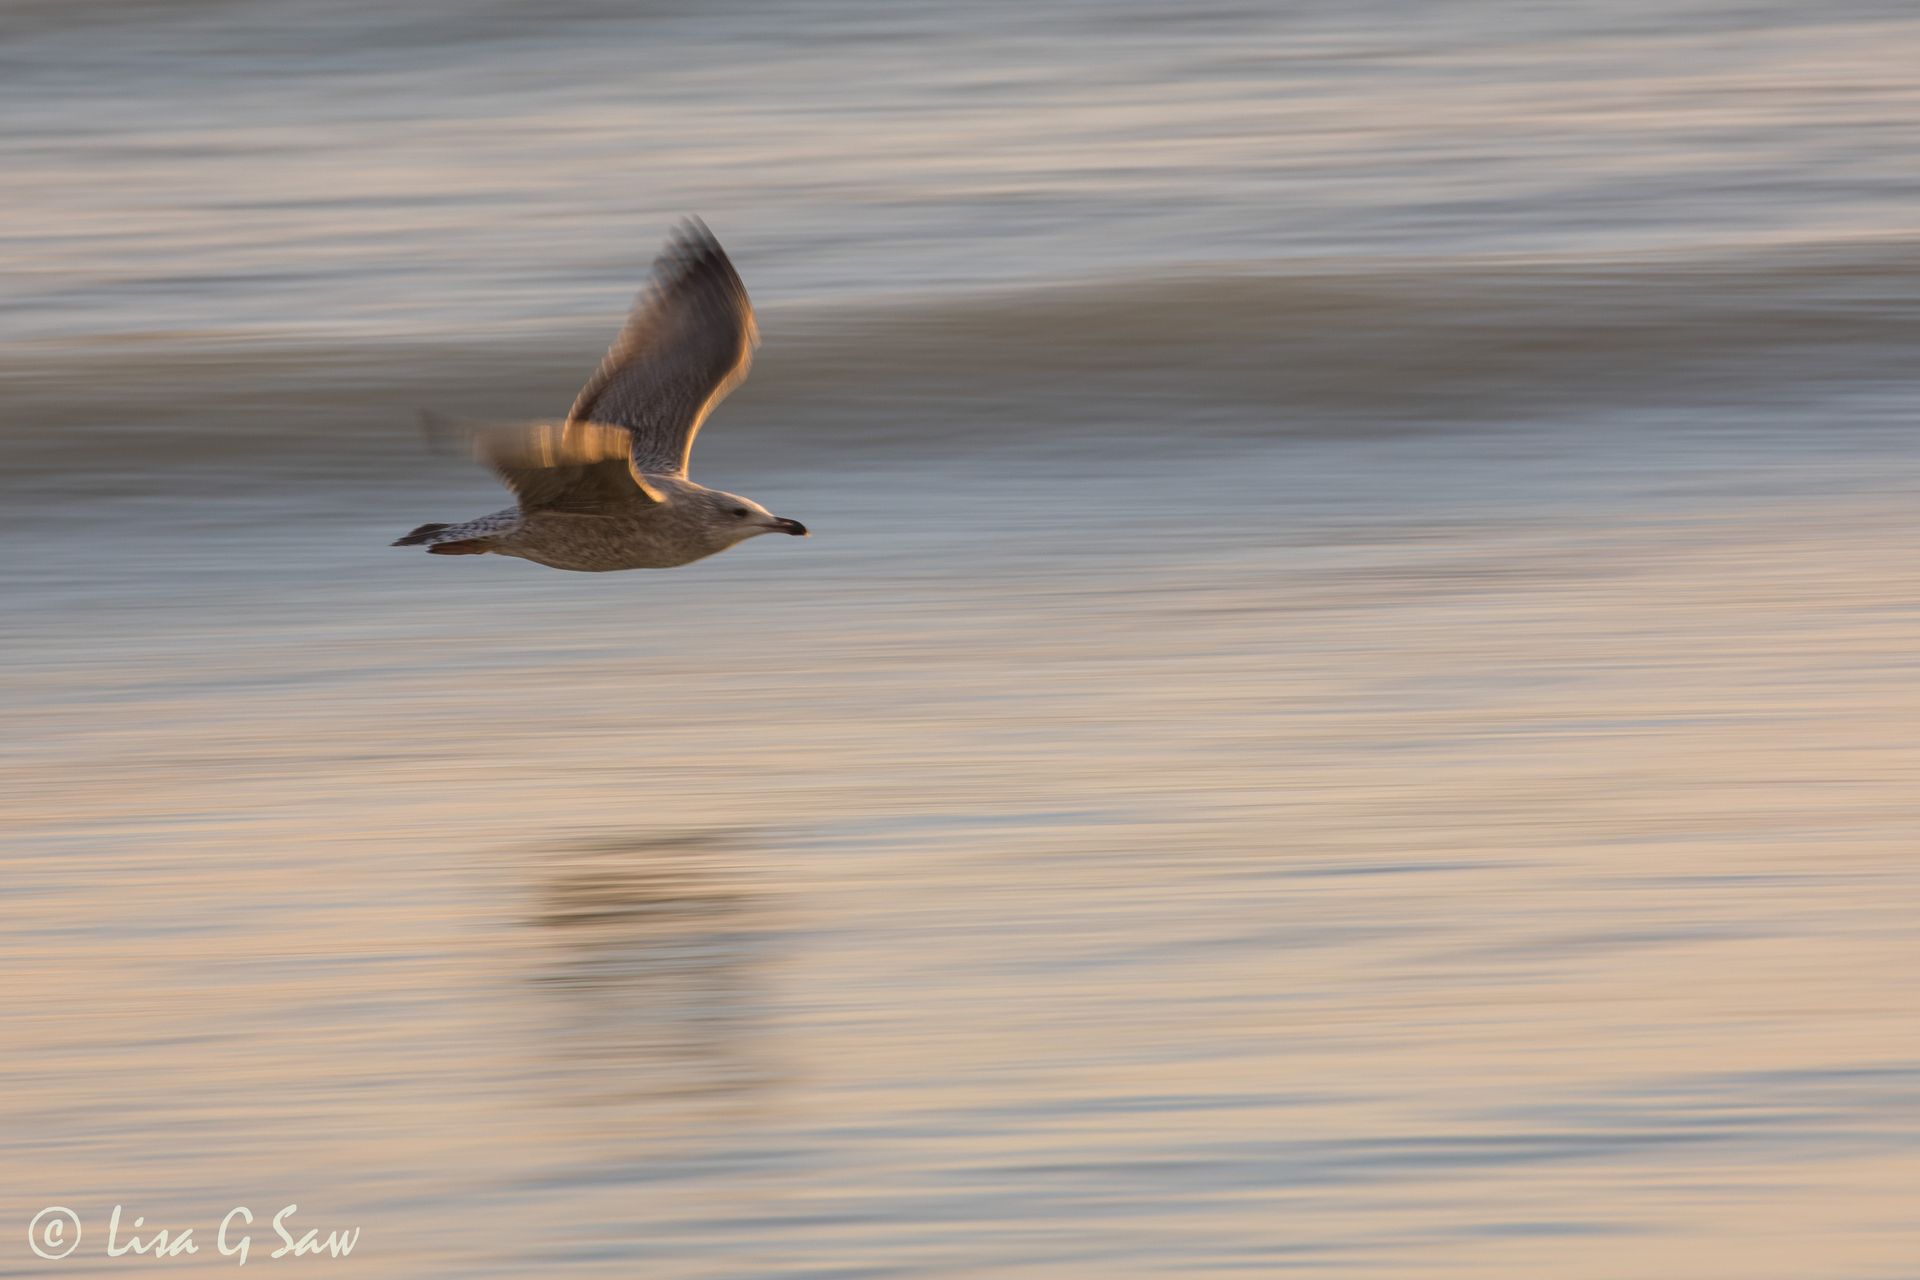 Slow panning a gull flying above the water